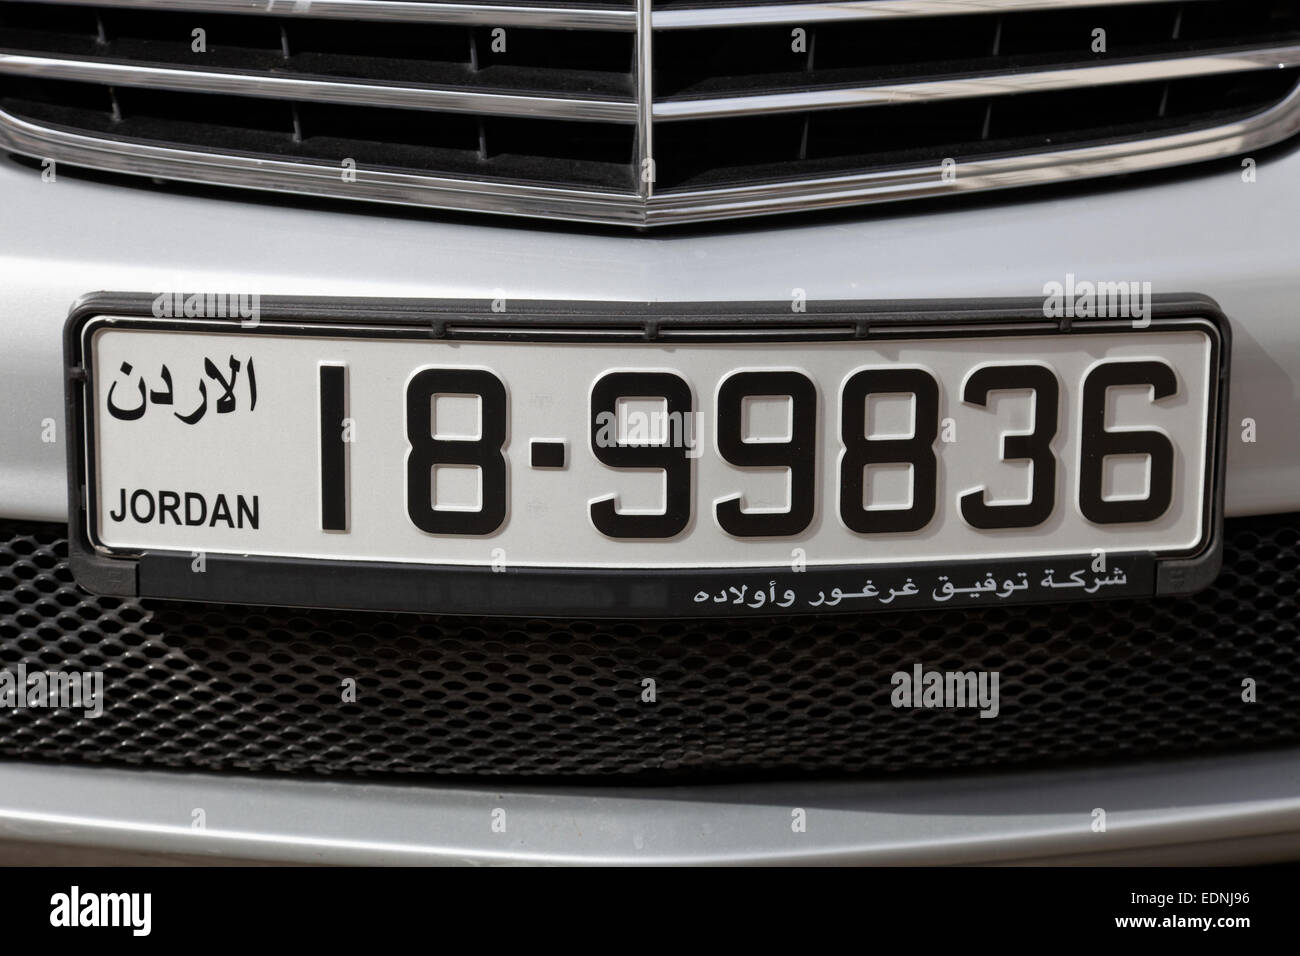 Jordan License Plate High Resolution Stock Photography and Images - Alamy